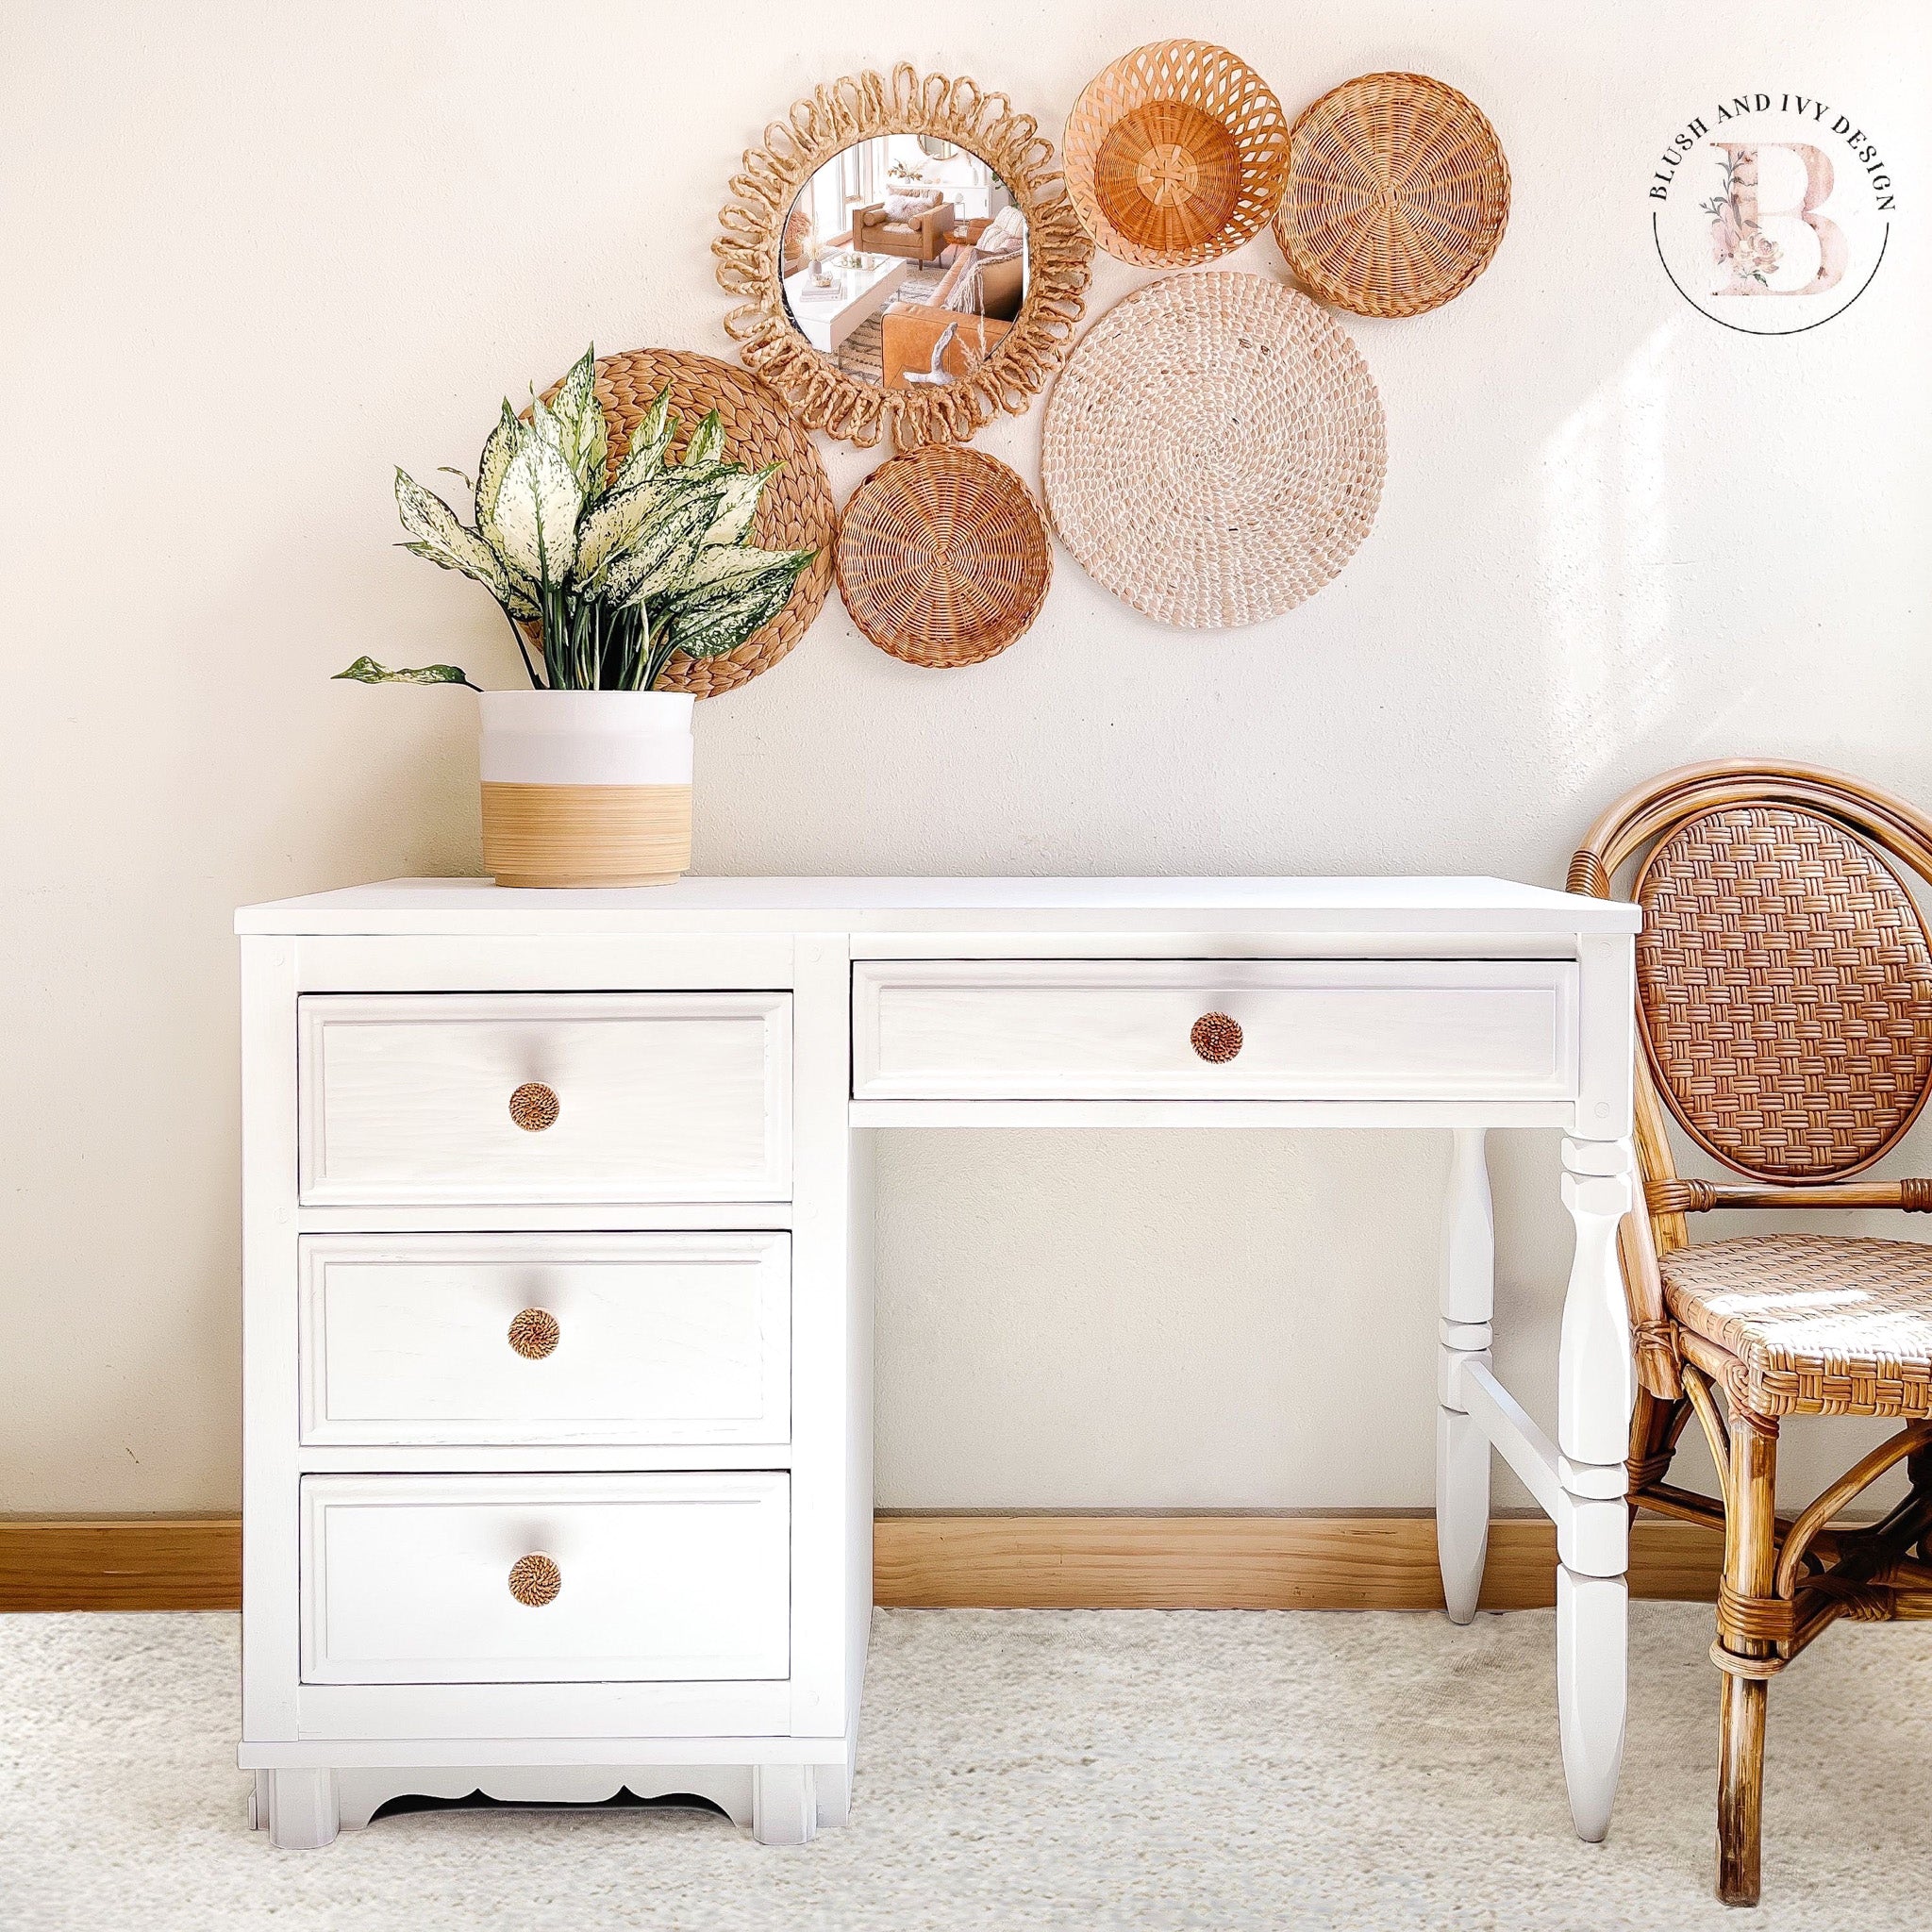 A small desk with 4 drawers refurbished by Blush and Ivy Design is painted in Dixie Belle's Cotton chalk mineral paint.